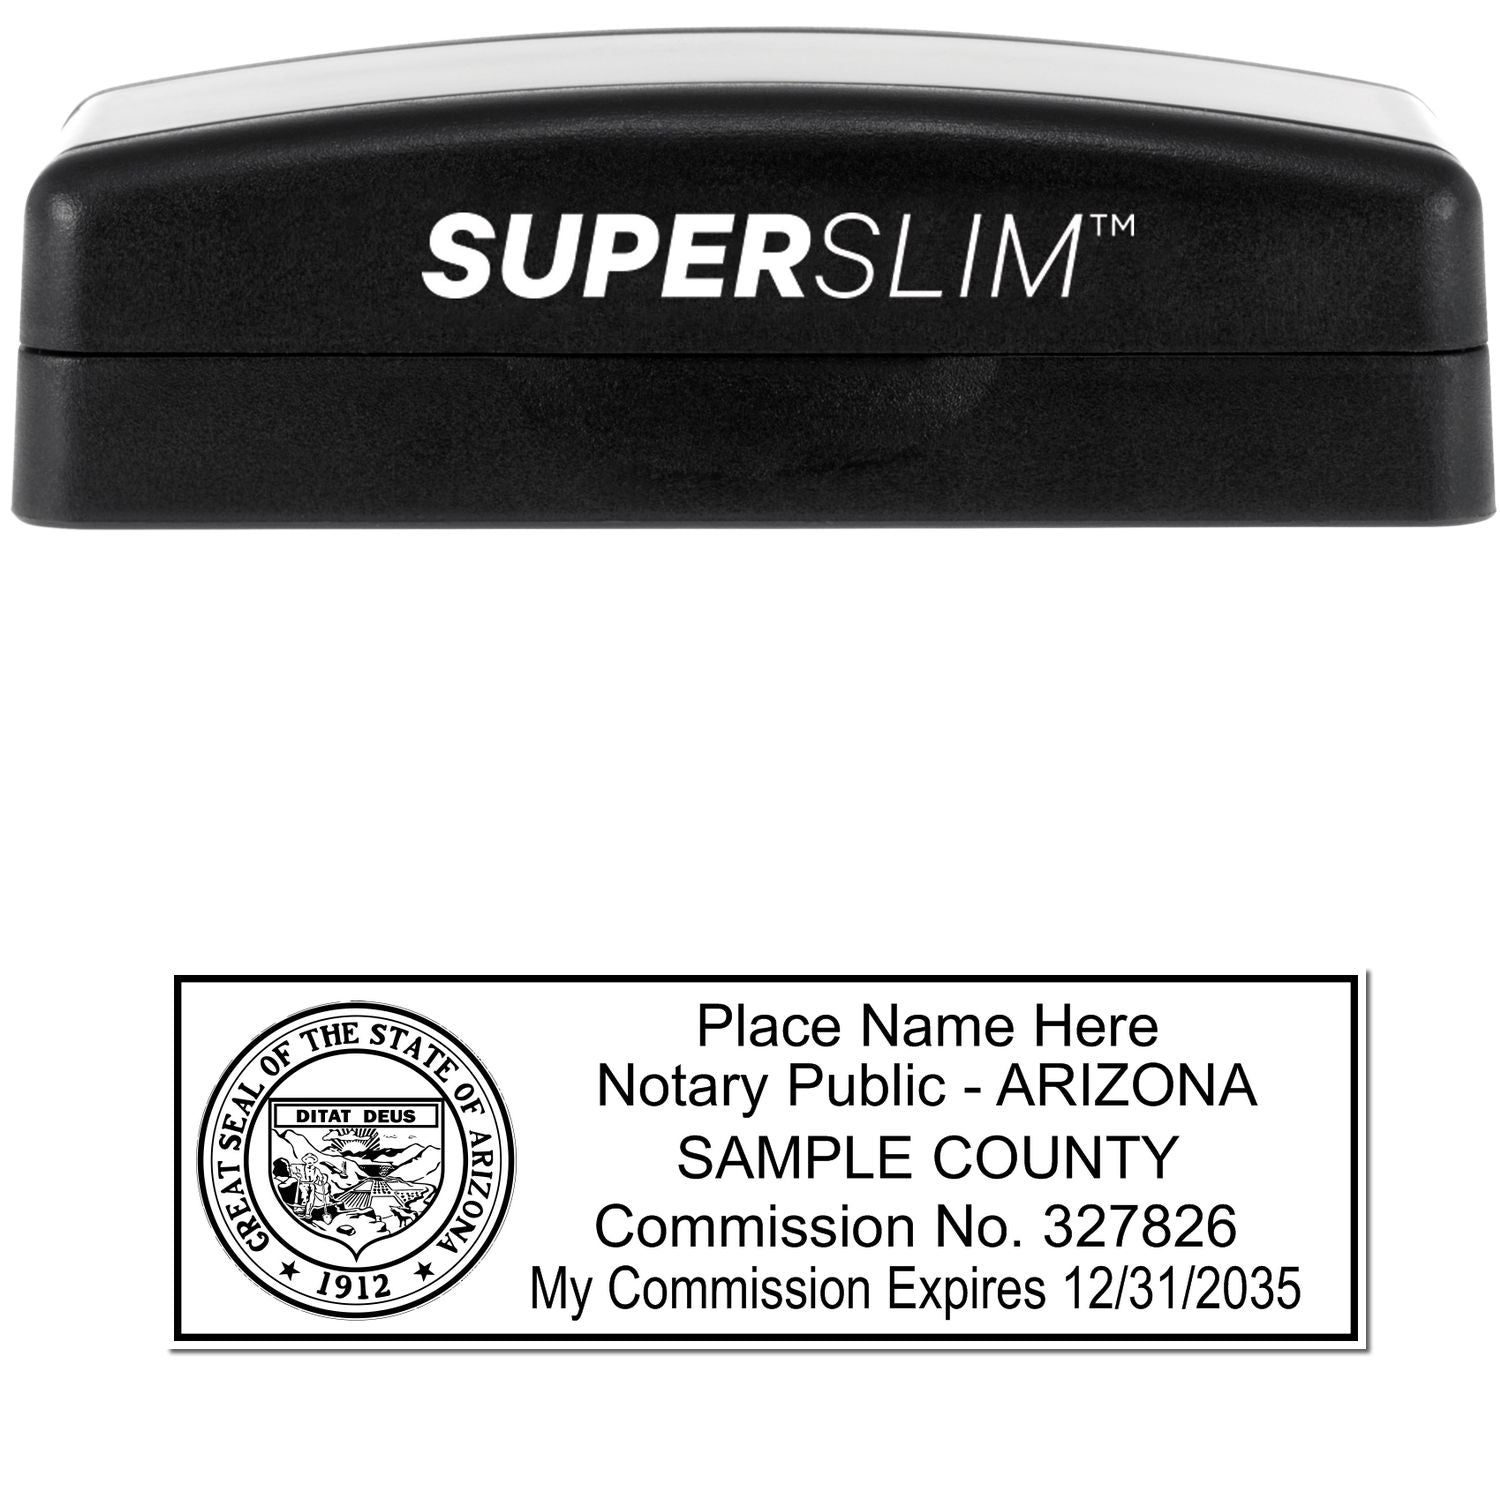 The main image for the Super Slim Arizona Notary Public Stamp depicting a sample of the imprint and electronic files